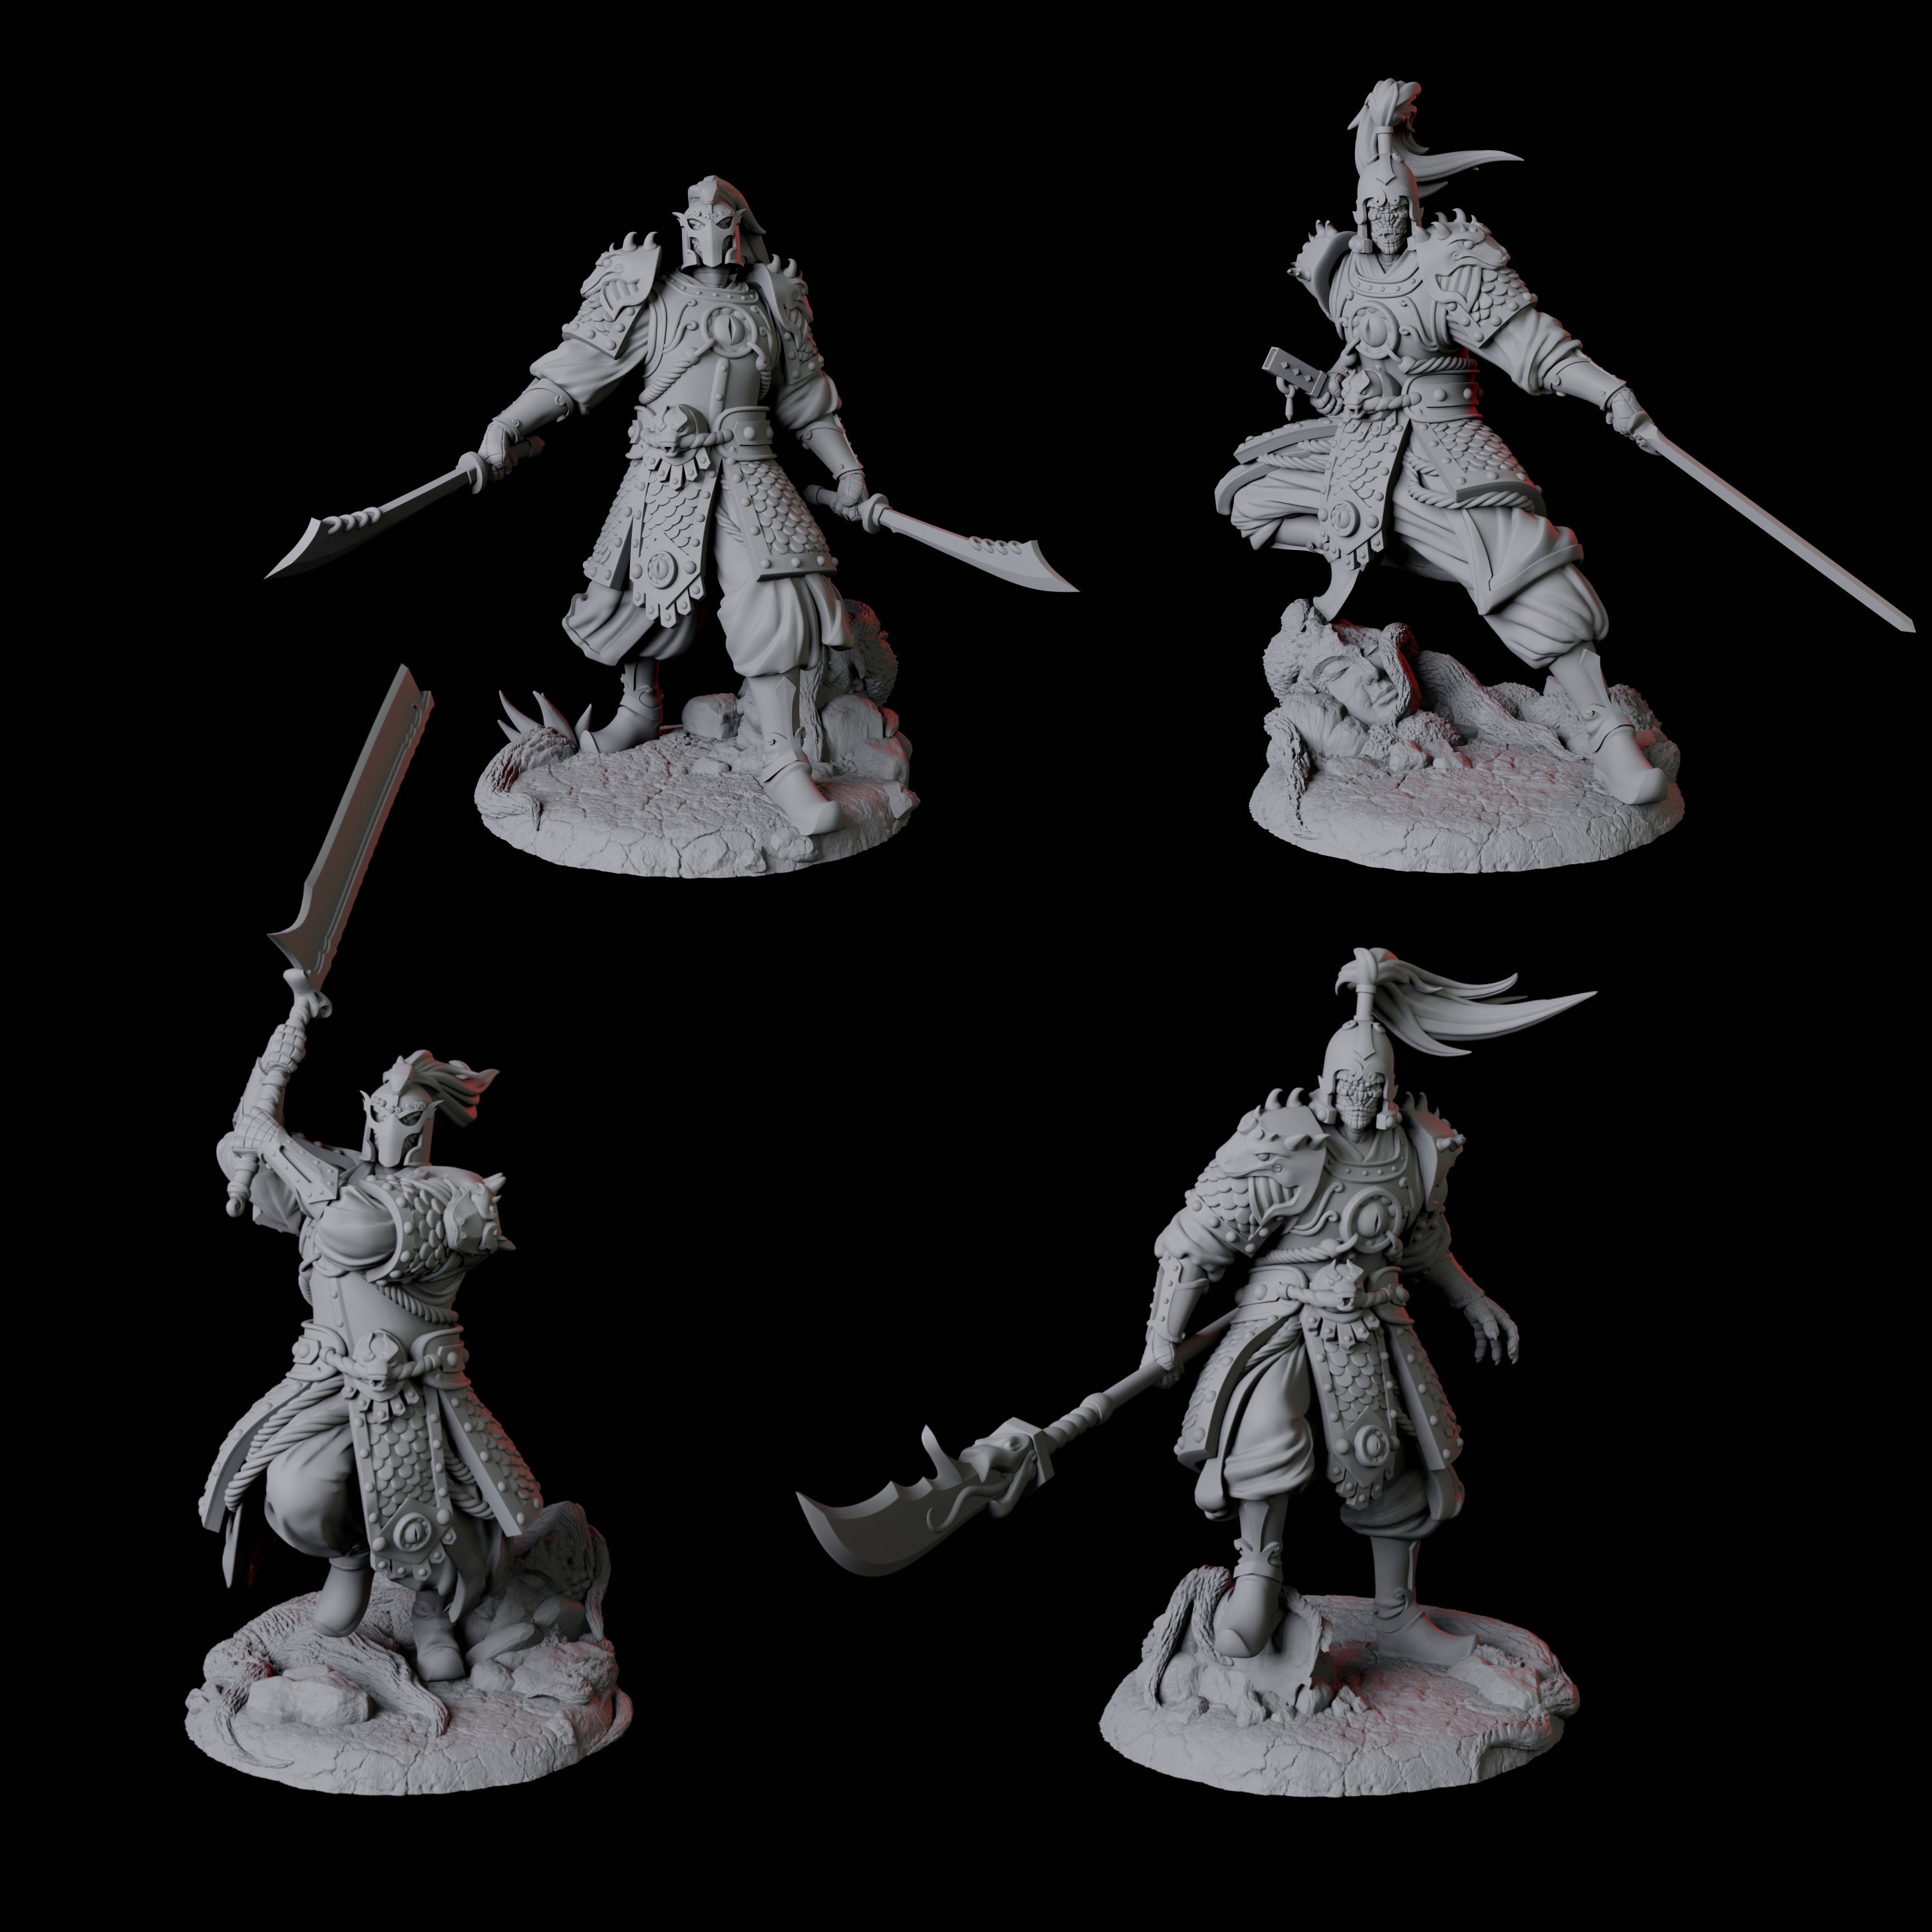 Four Cunning Yuan-Ti Warriors Miniature for Dungeons and Dragons, Pathfinder or other TTRPGs